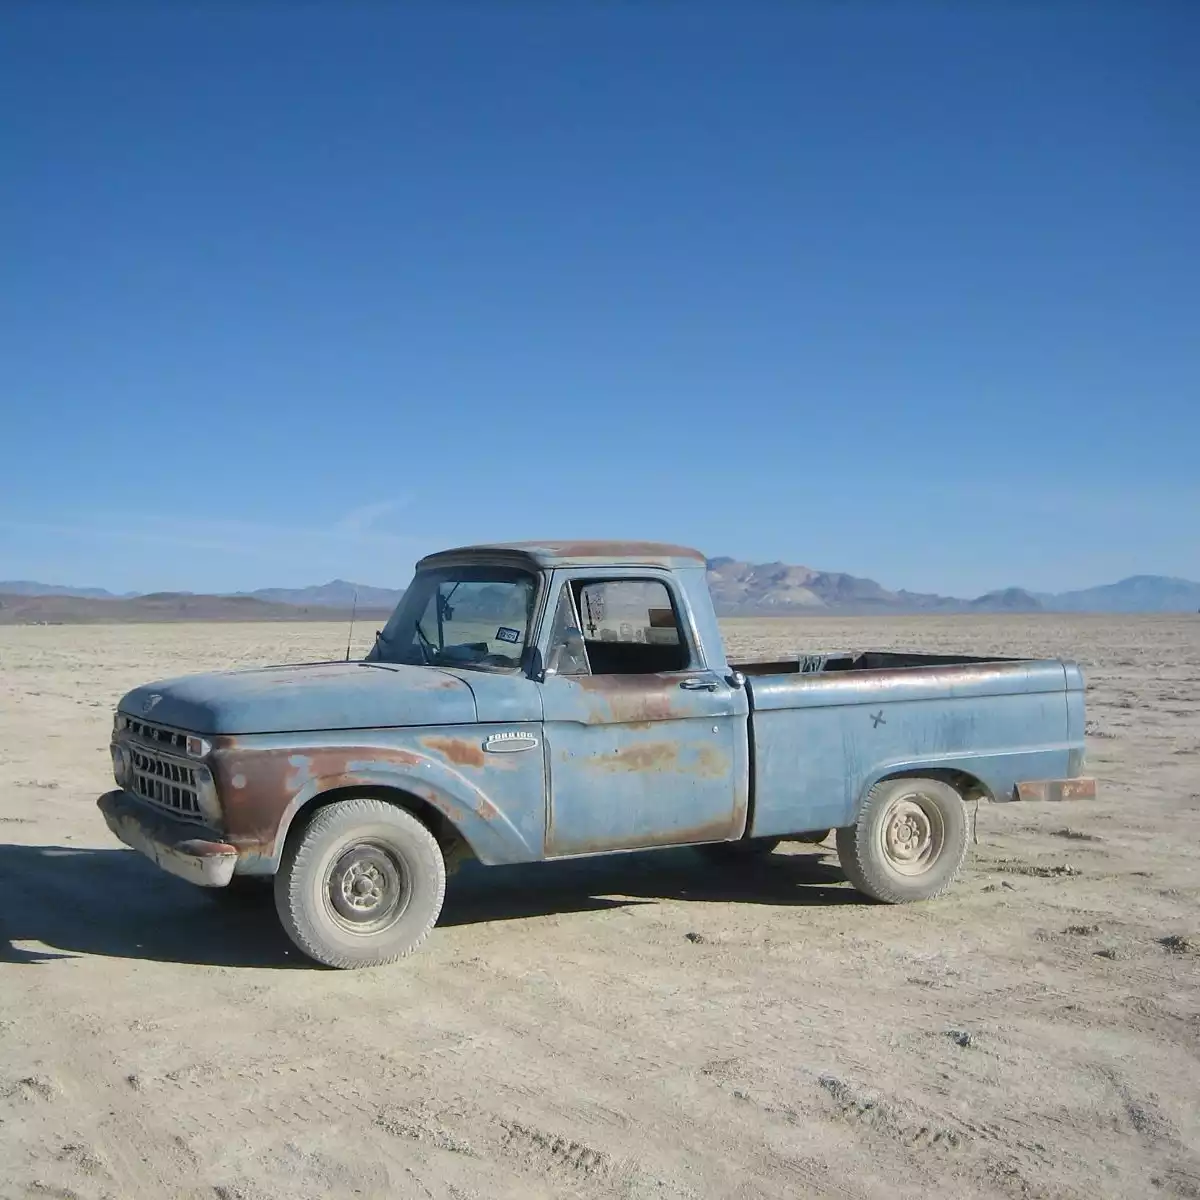 A vintage blue truck on the playa of Black Rock City in northwestern Nevada. The Painted mountains are distant. The tires of the truck are covered in grayish alkaline dust.